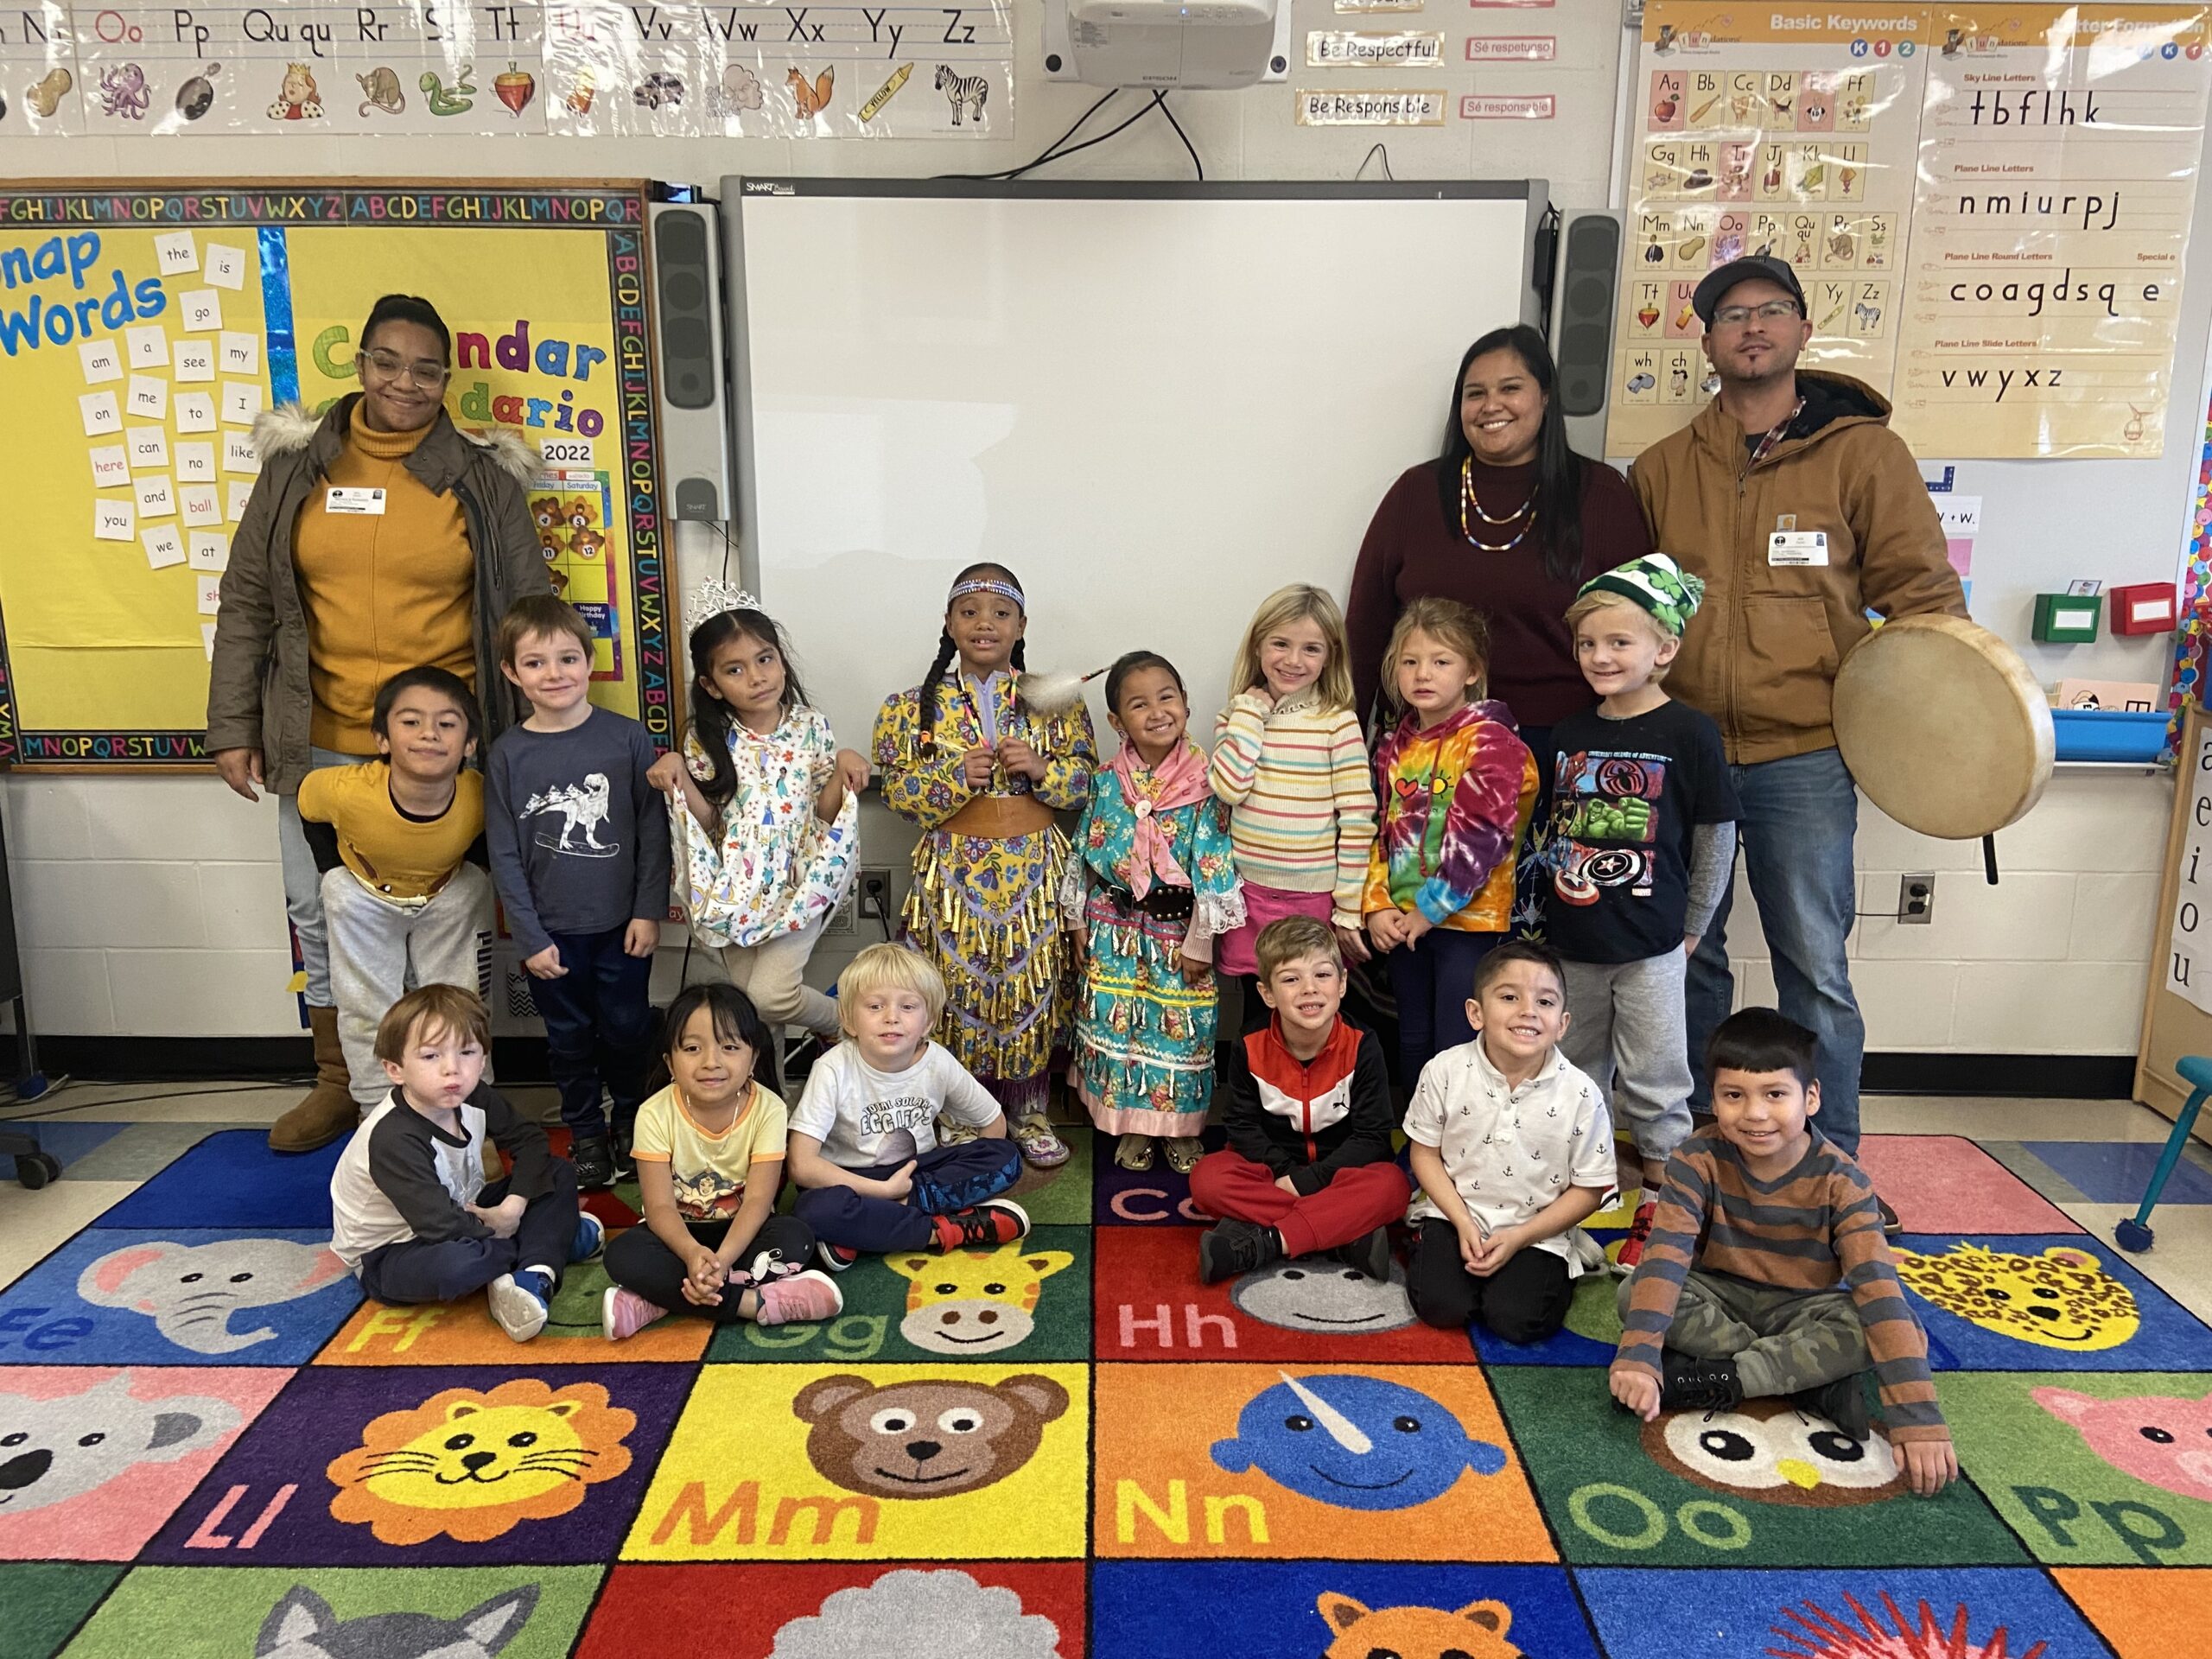 Southampton Elementary School kindergarten students in Tracy Koszalkas’ class celebrated Native American Heritage Month by listening to the book “Jingle Dancer” by Cynthia Leitich Smith and learning about traditional dance and music by from Erica Phillips, Josh Richardson and Nichole Rosado, parents of their peers. COURTESY SOUTHAMPTON SCHOOL DISTRICT